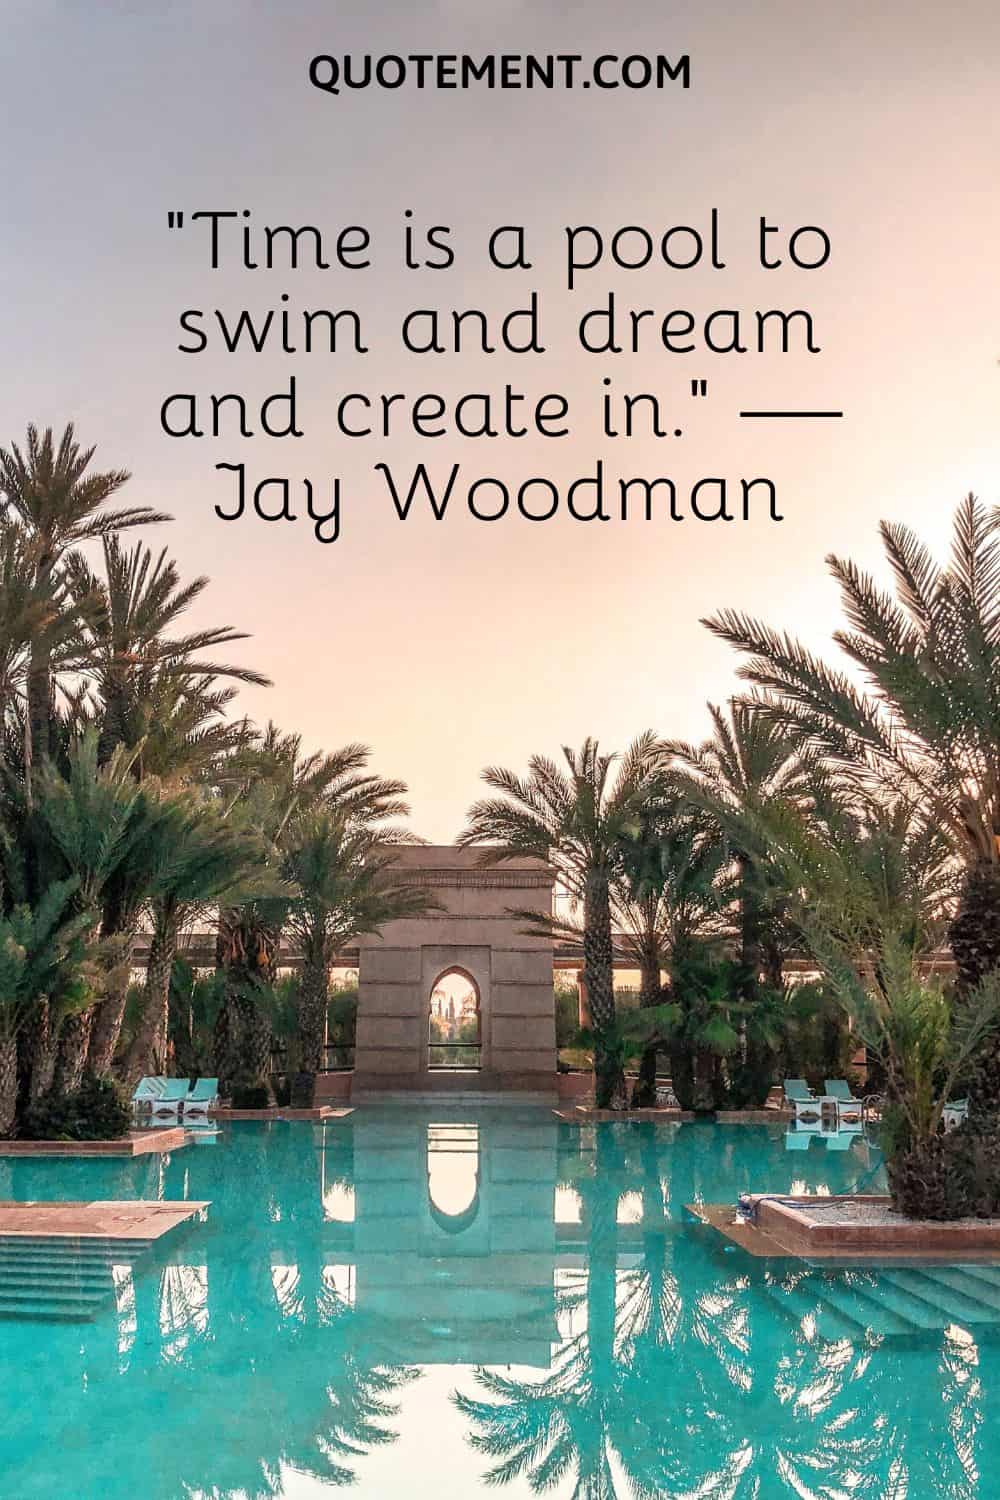 “Time is a pool to swim and dream and create in.” — Jay Woodman